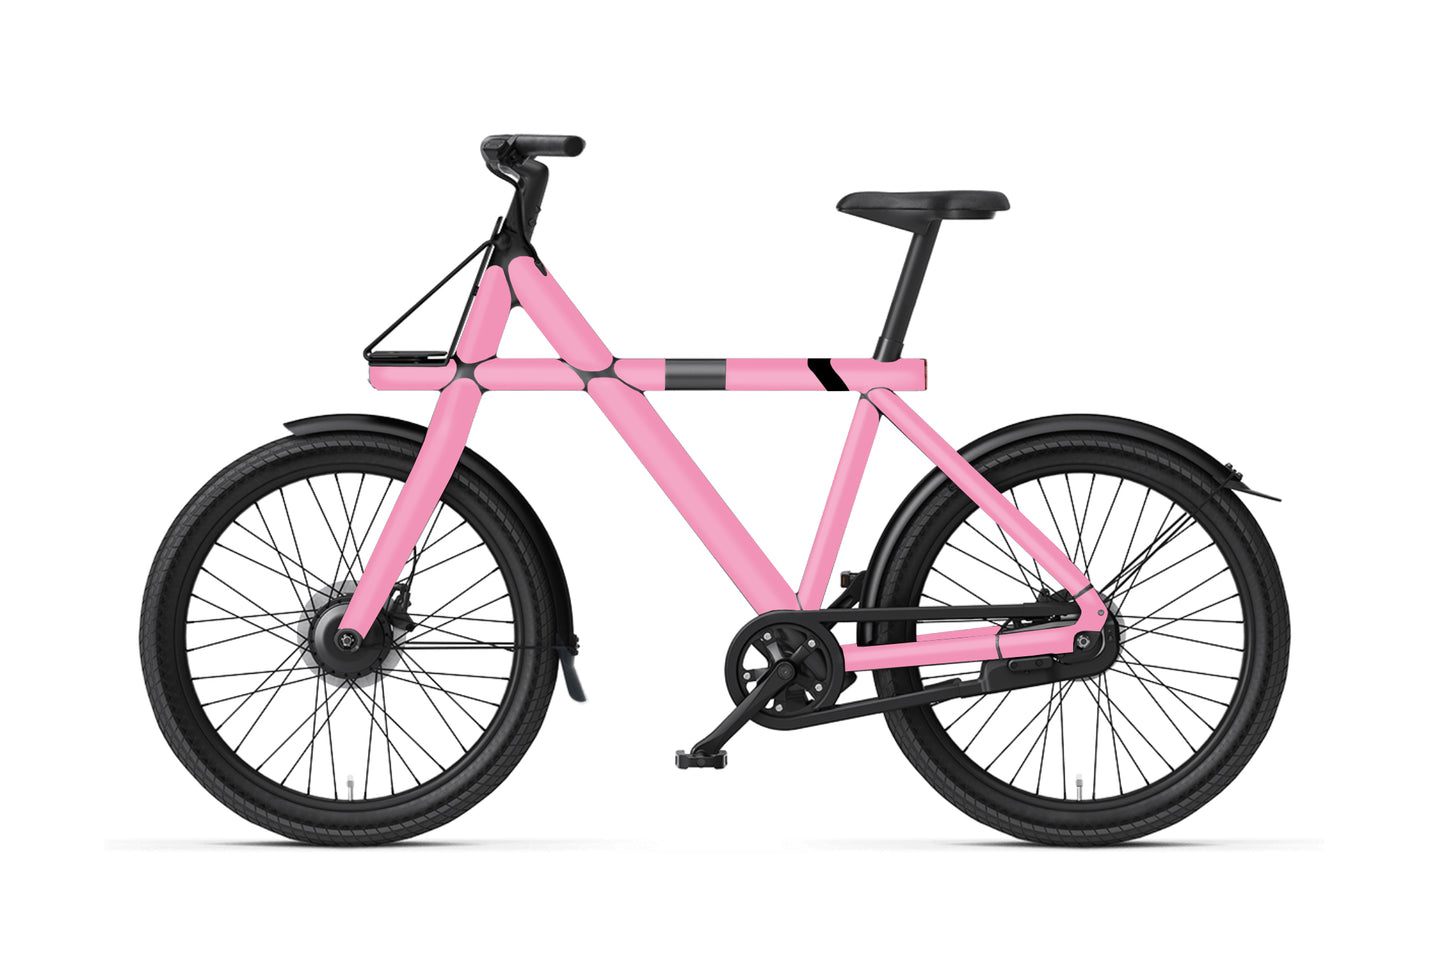 PINK PROTECT KIT FOR VANMOOF X3